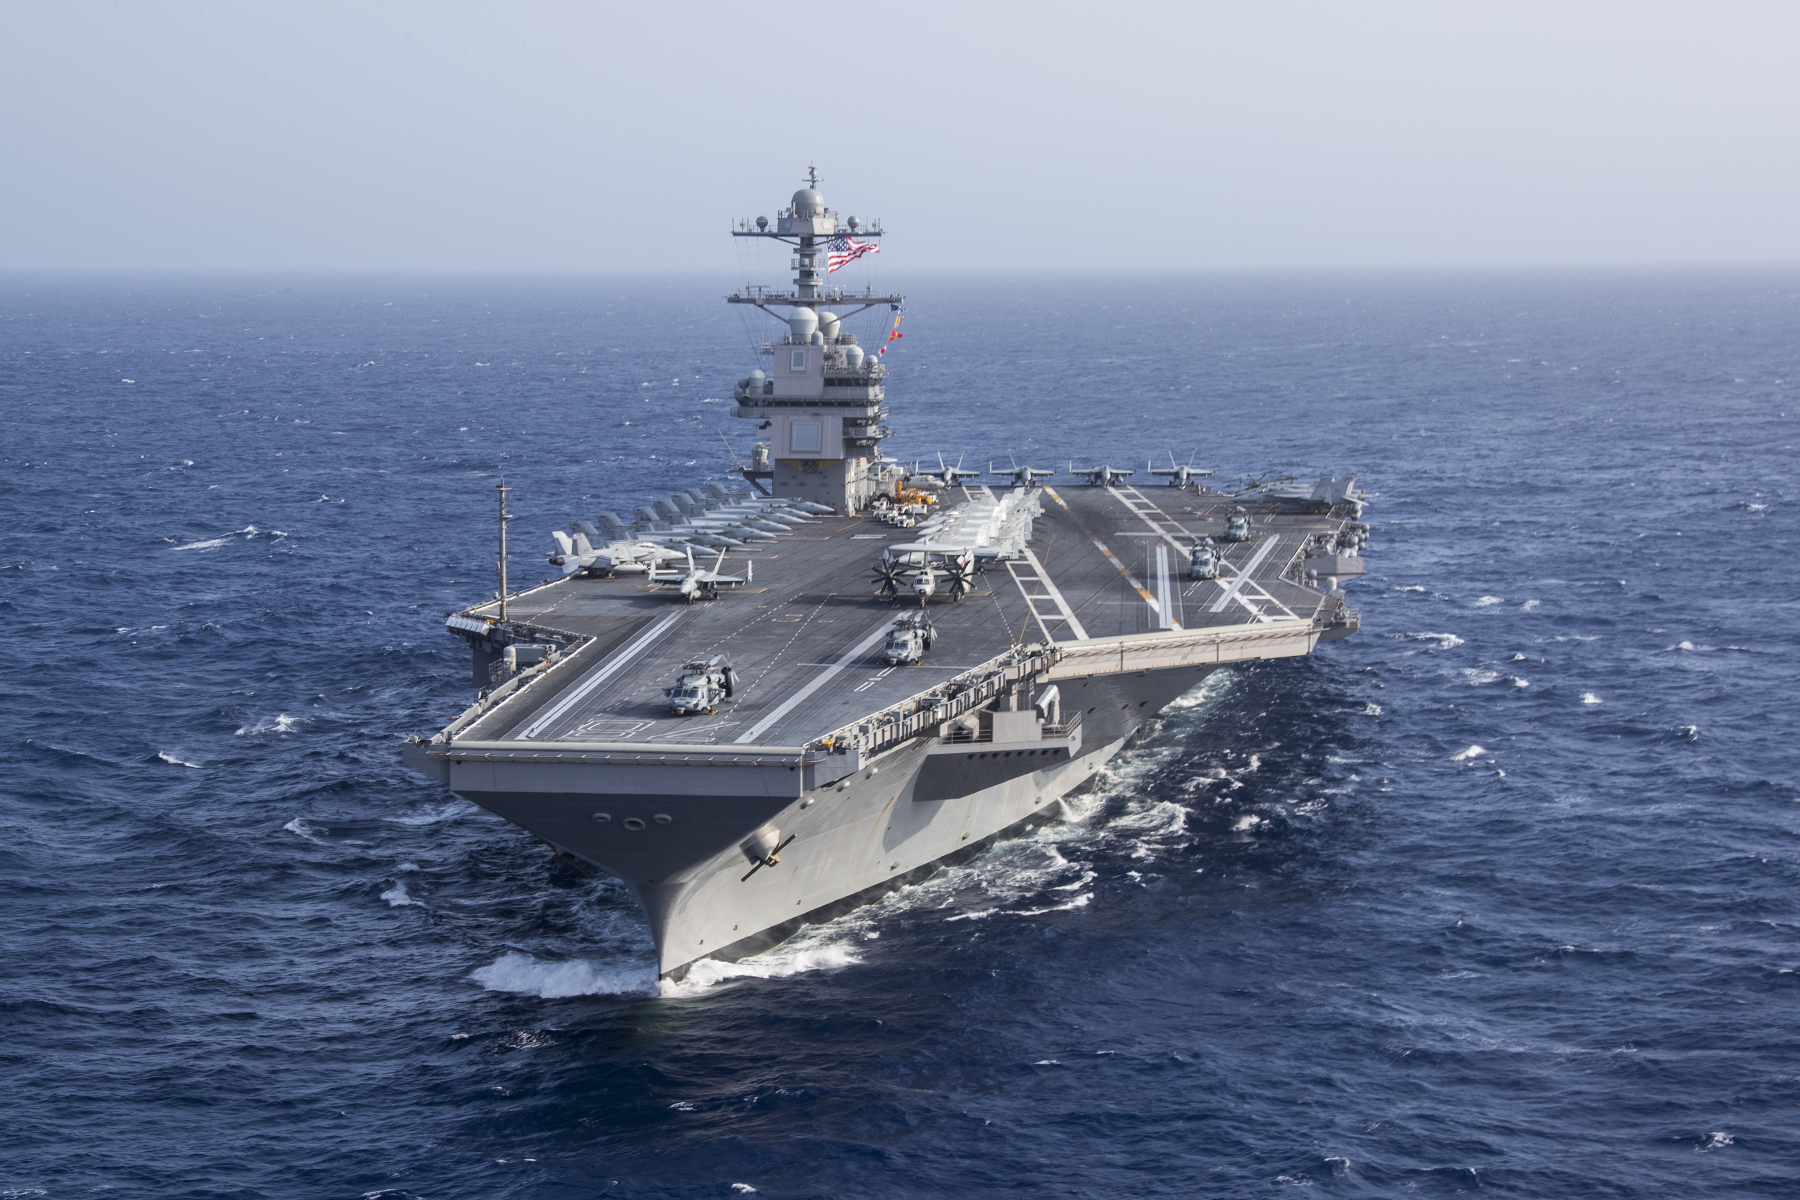 Mehdi H. on Twitter: "Nice picture of the Ford-class aircraft carrier USS Gerald R. Ford #CVN78 in the Atlantic Ocean on June 4, 2020. #USNavy photo by Mass Communication Specialist 2nd Class